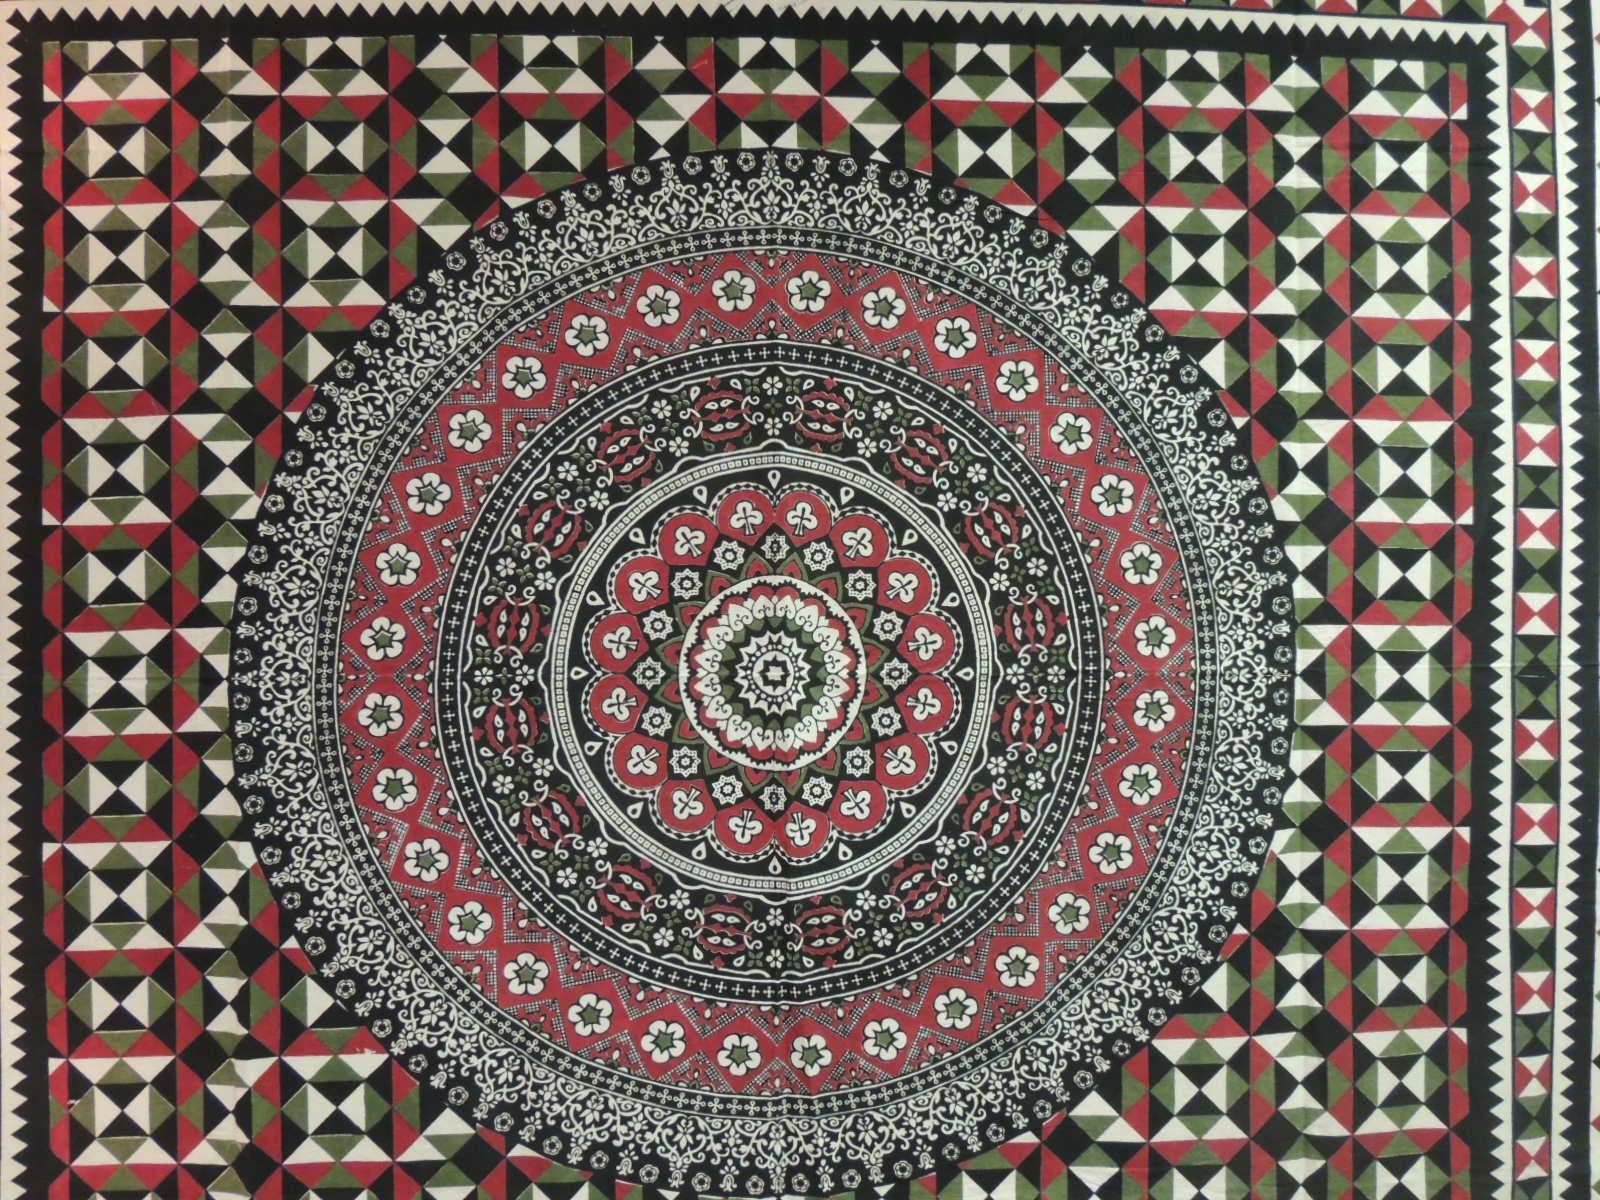 Large Indian red and black with green hand-blocked printed on cotton cloth/bed cover.
Large centre medallion depicting flowers.
Size: 94